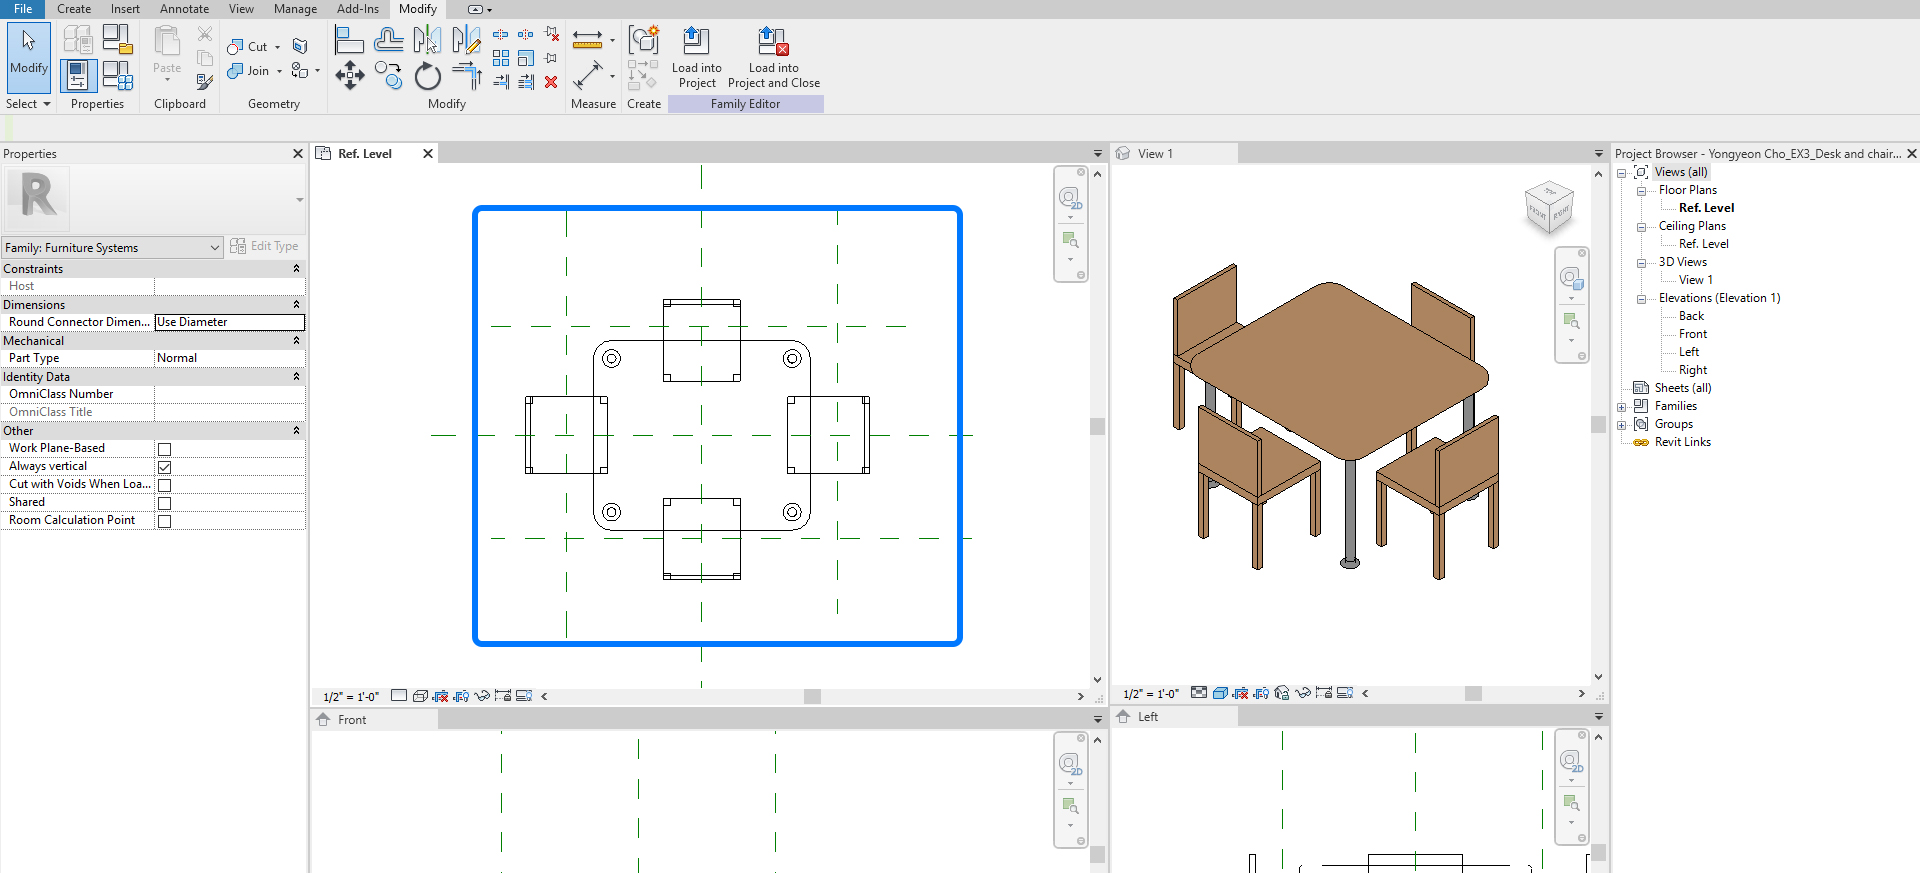 It indicates how to add reference planes for the chairs.